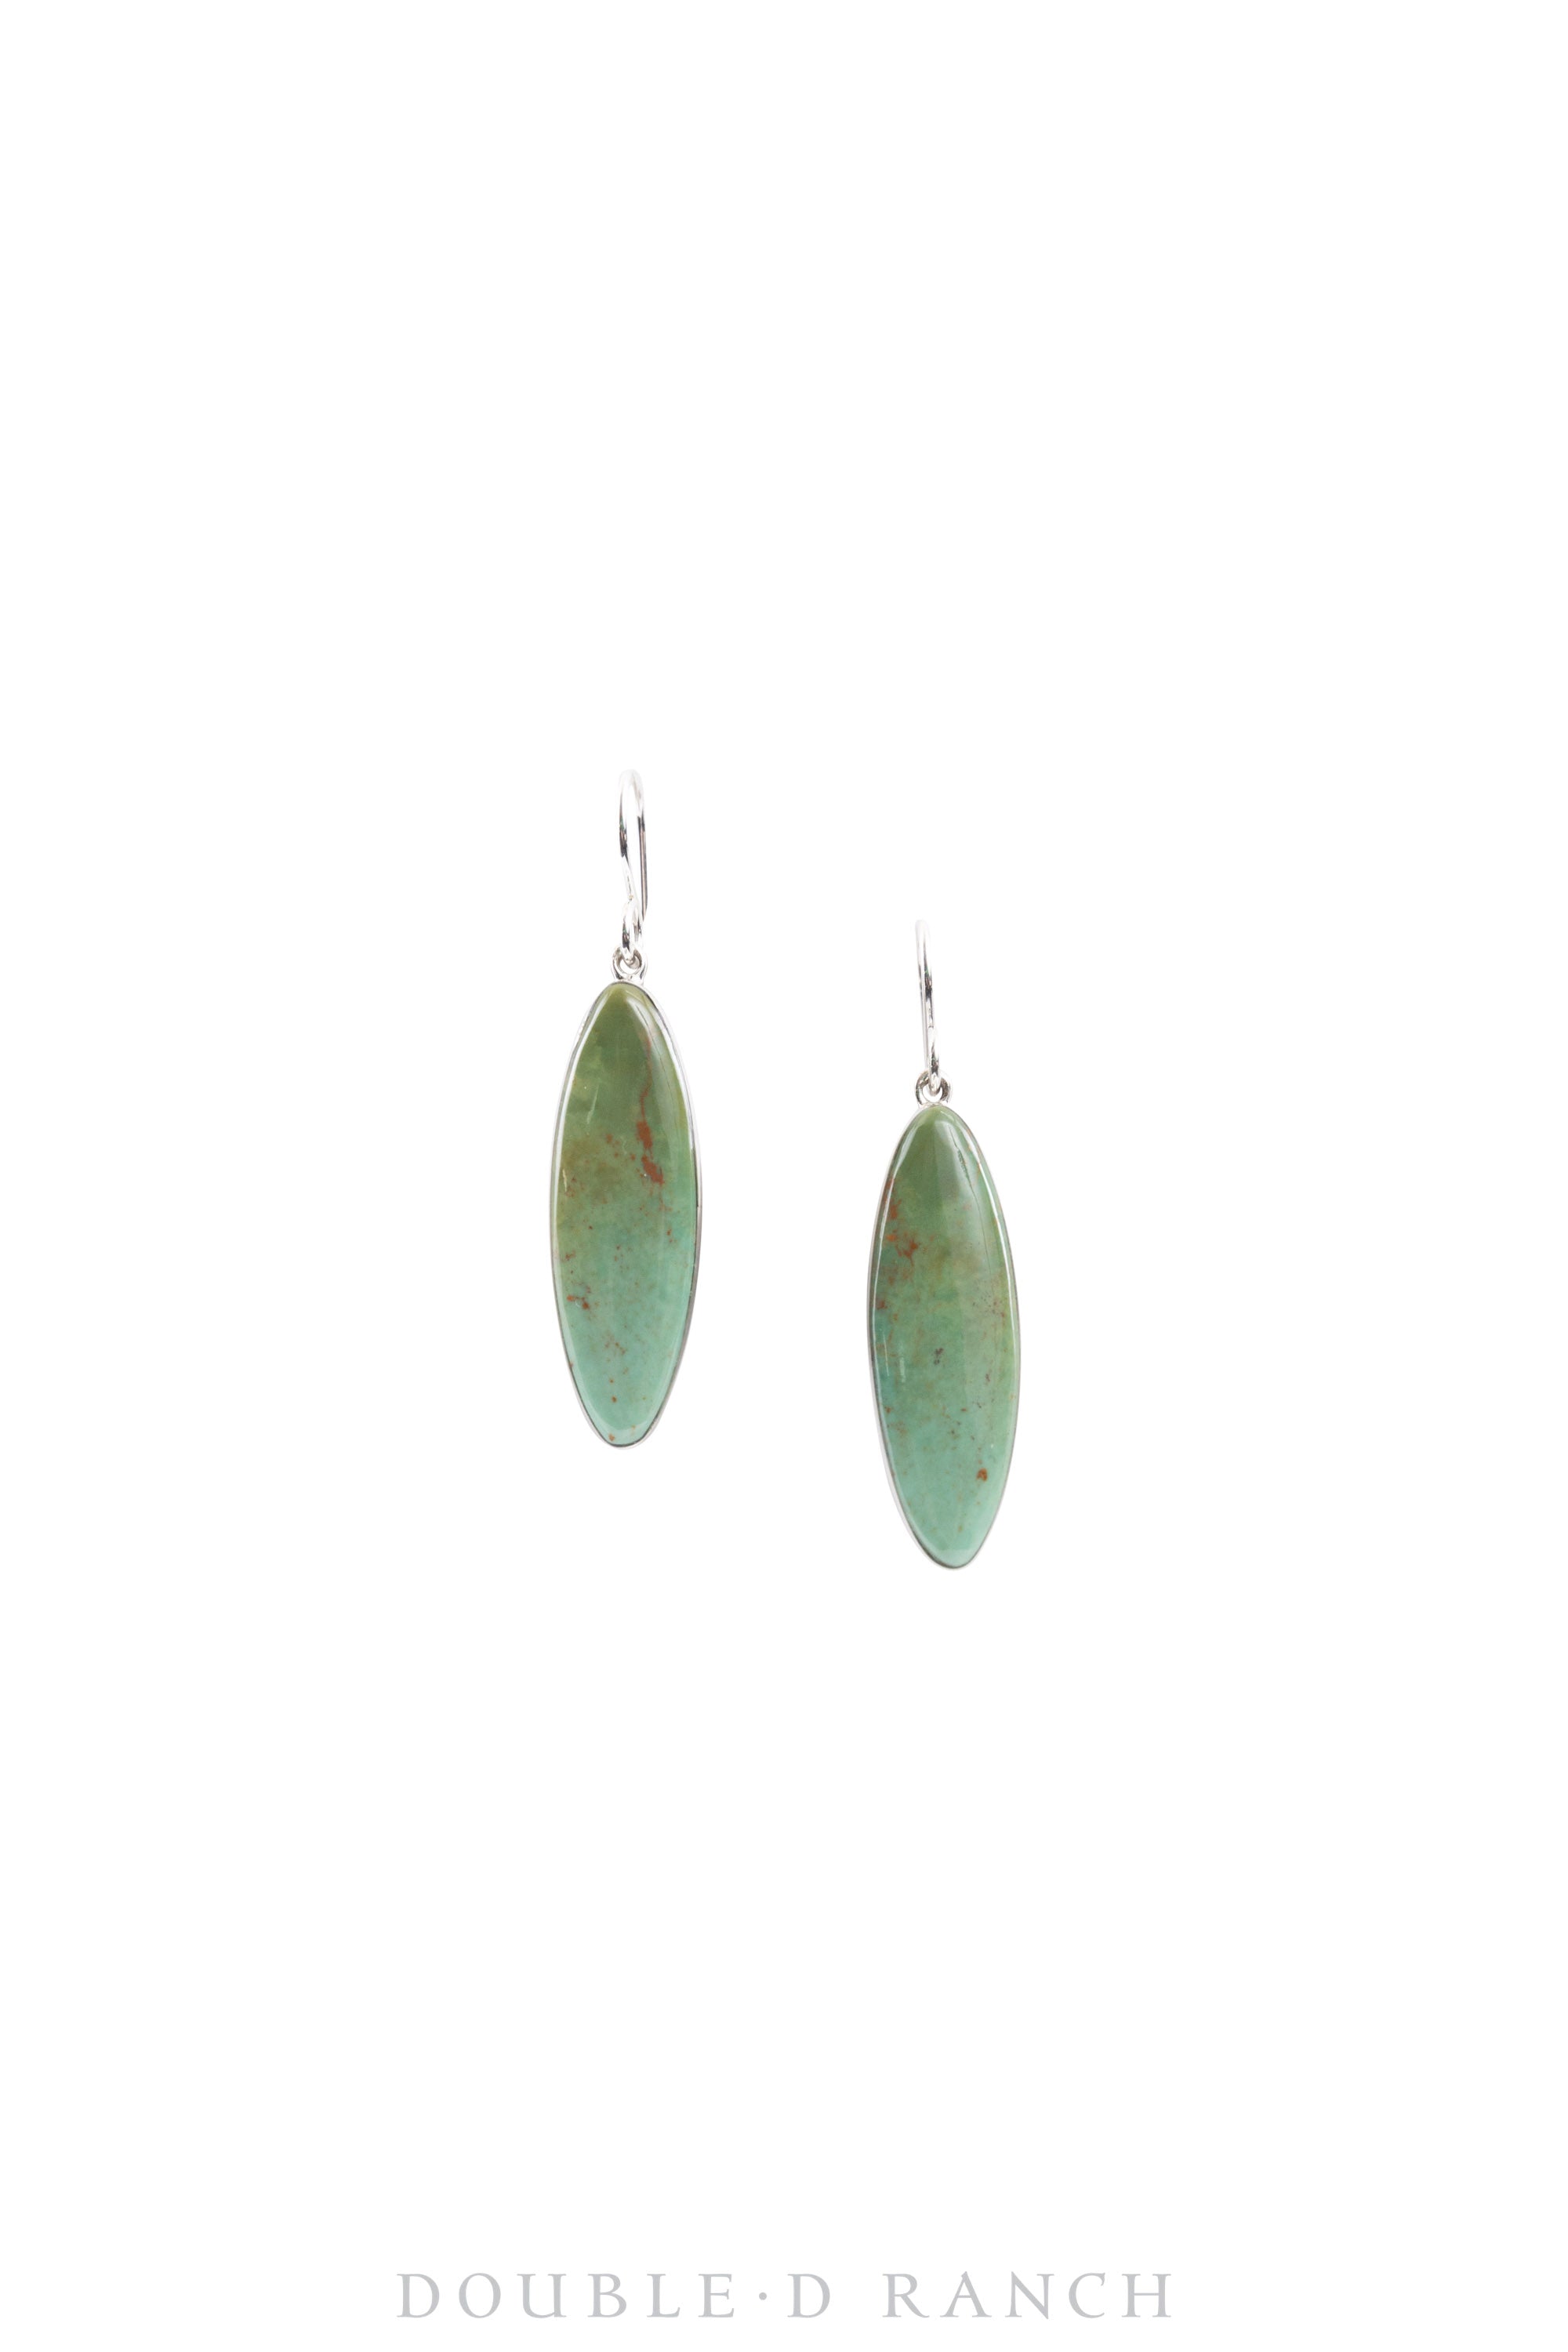 Earrings, Drops, Turquoise, Hallmark, Contemporary, 1430